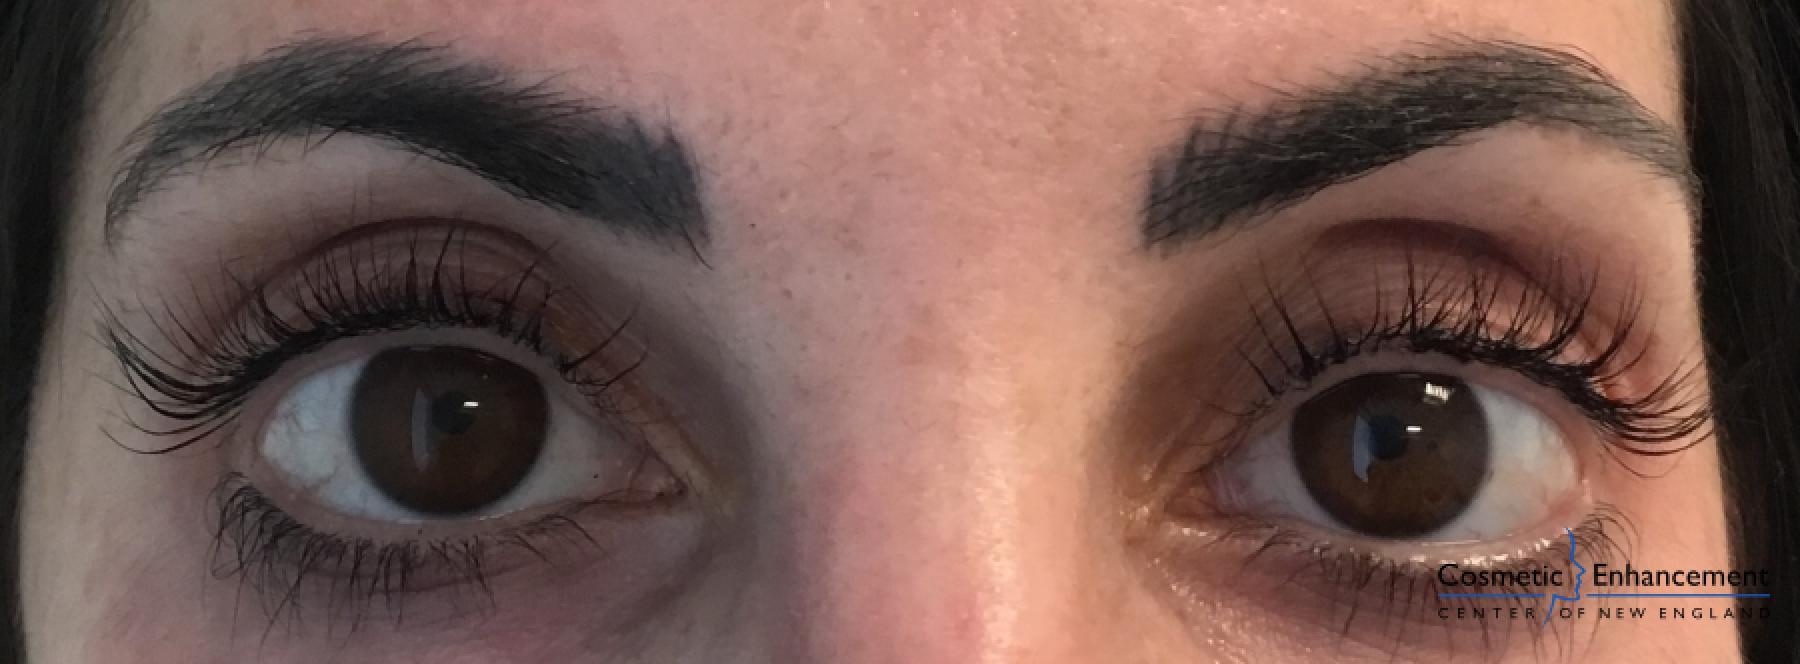 Lash Lift And Tint: Patient 3 - After 1